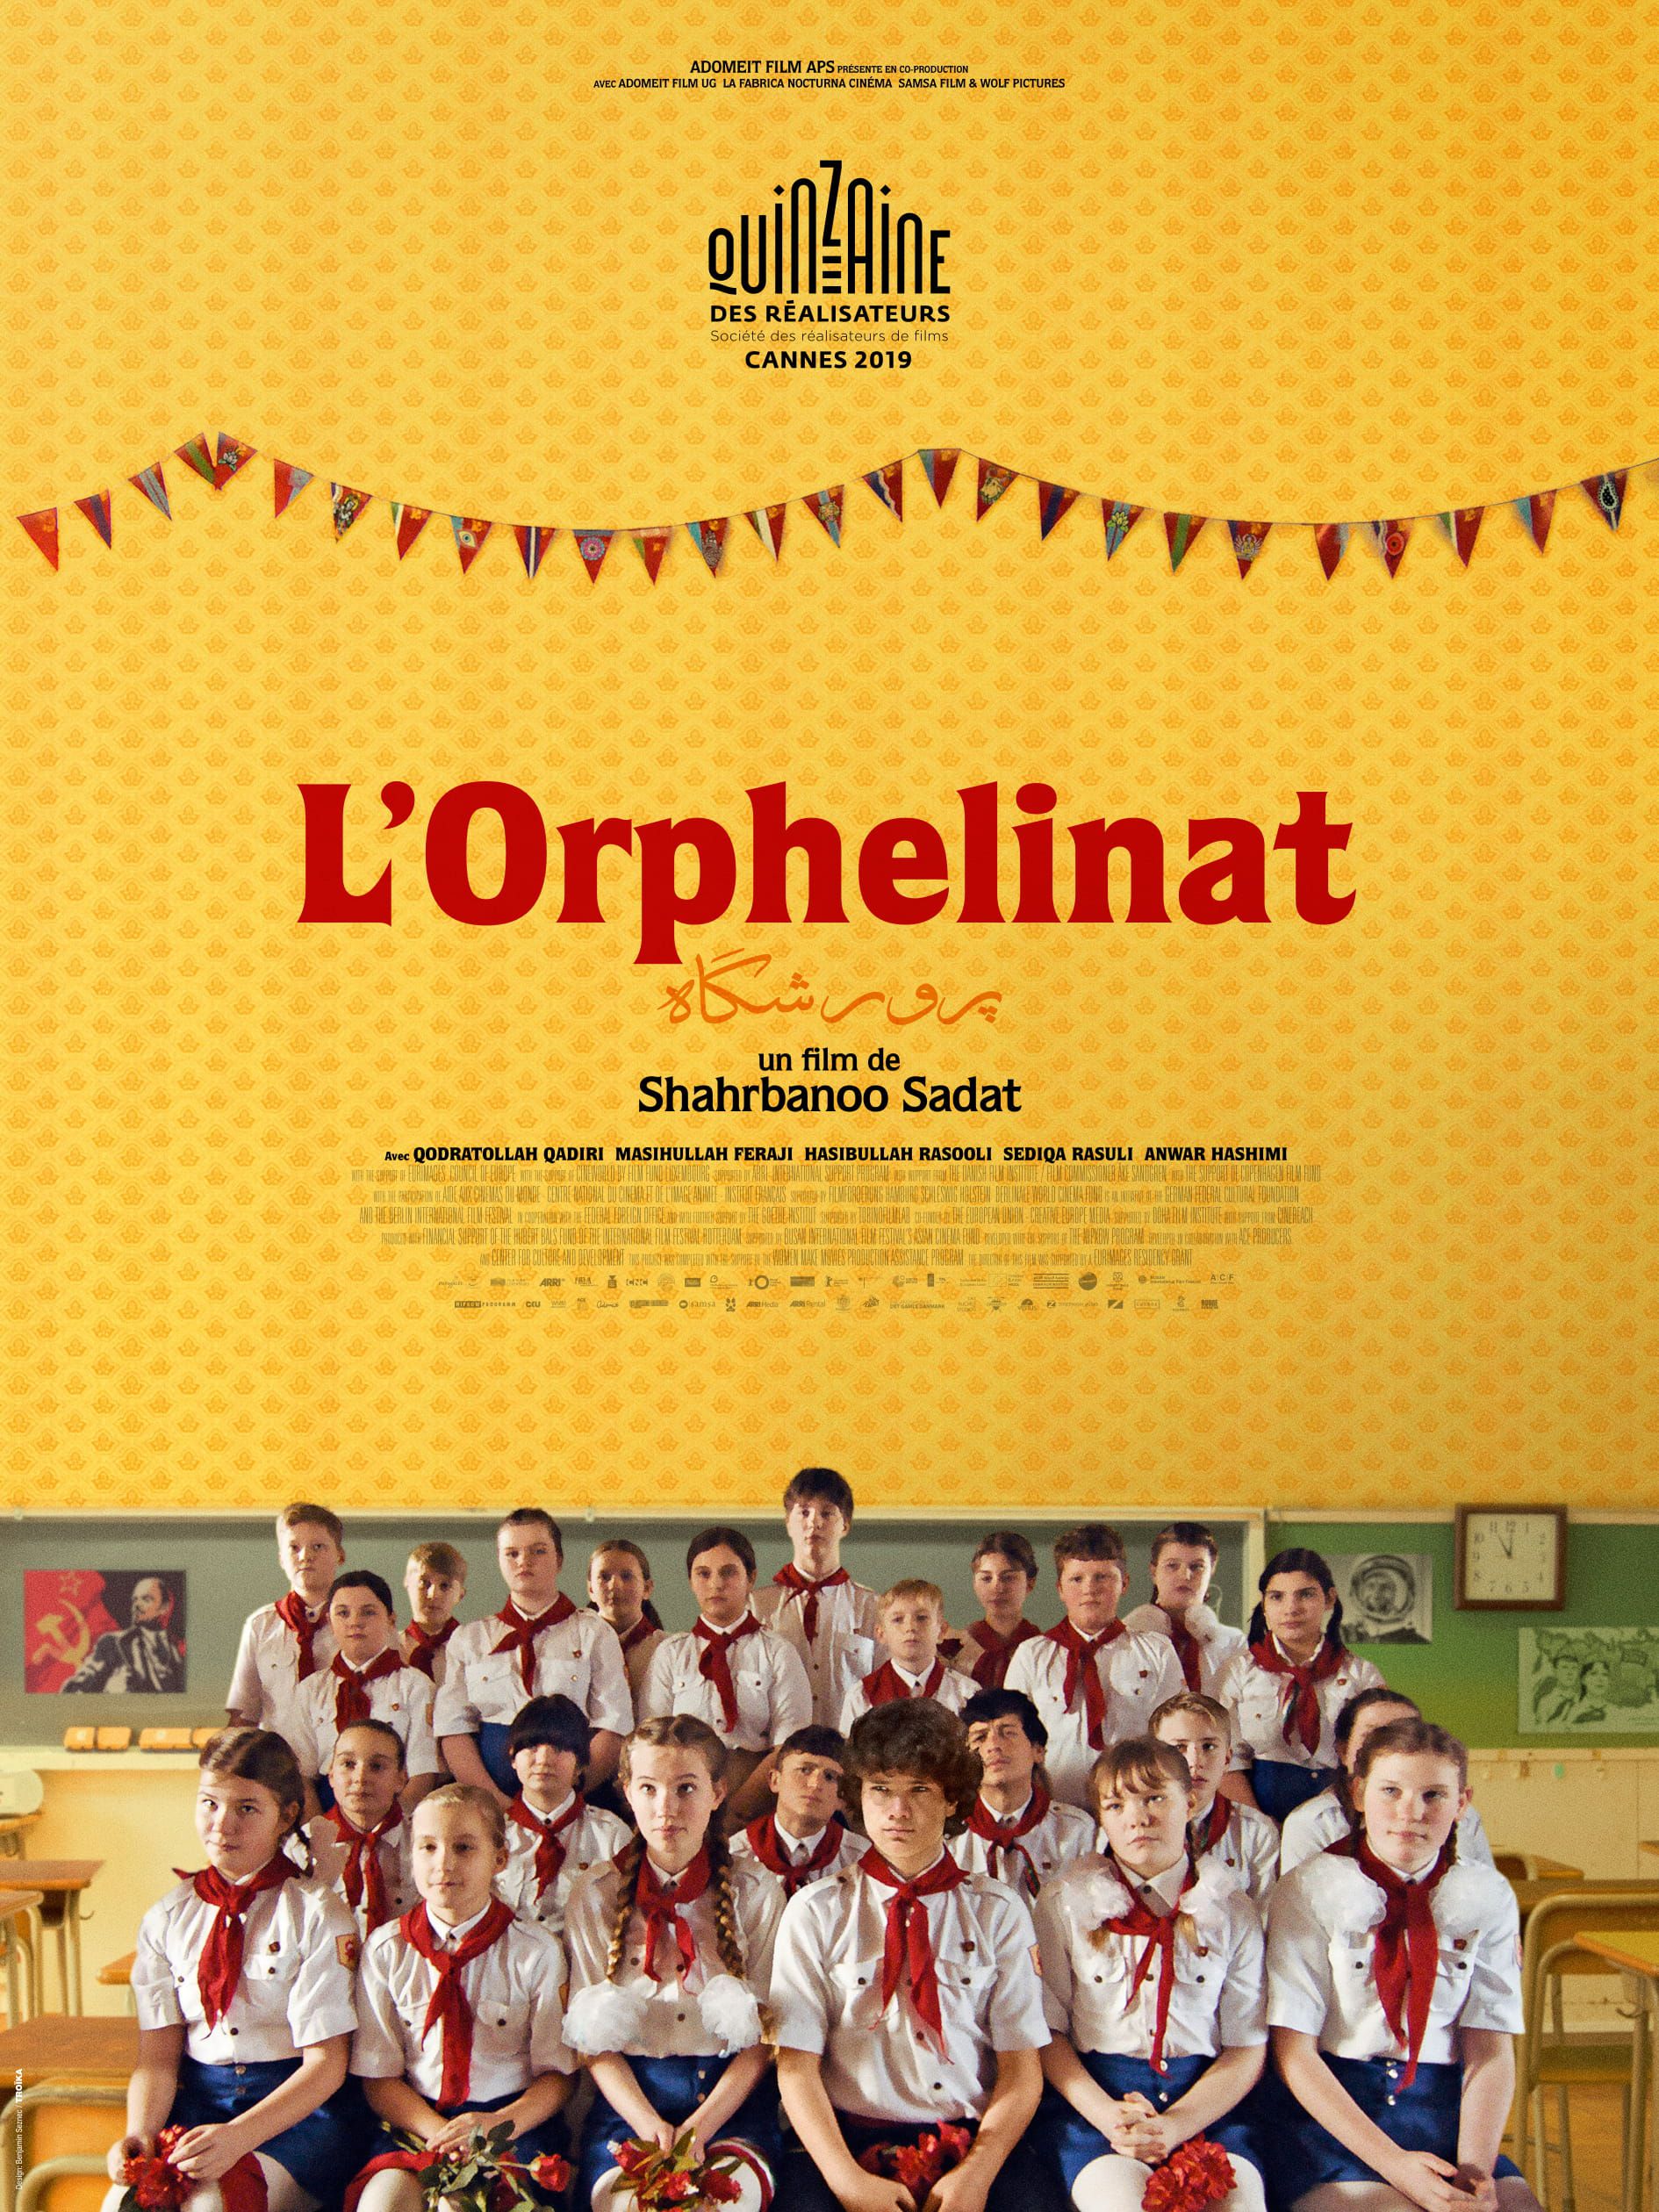 L'Orphelinat - Film (2019) streaming VF gratuit complet